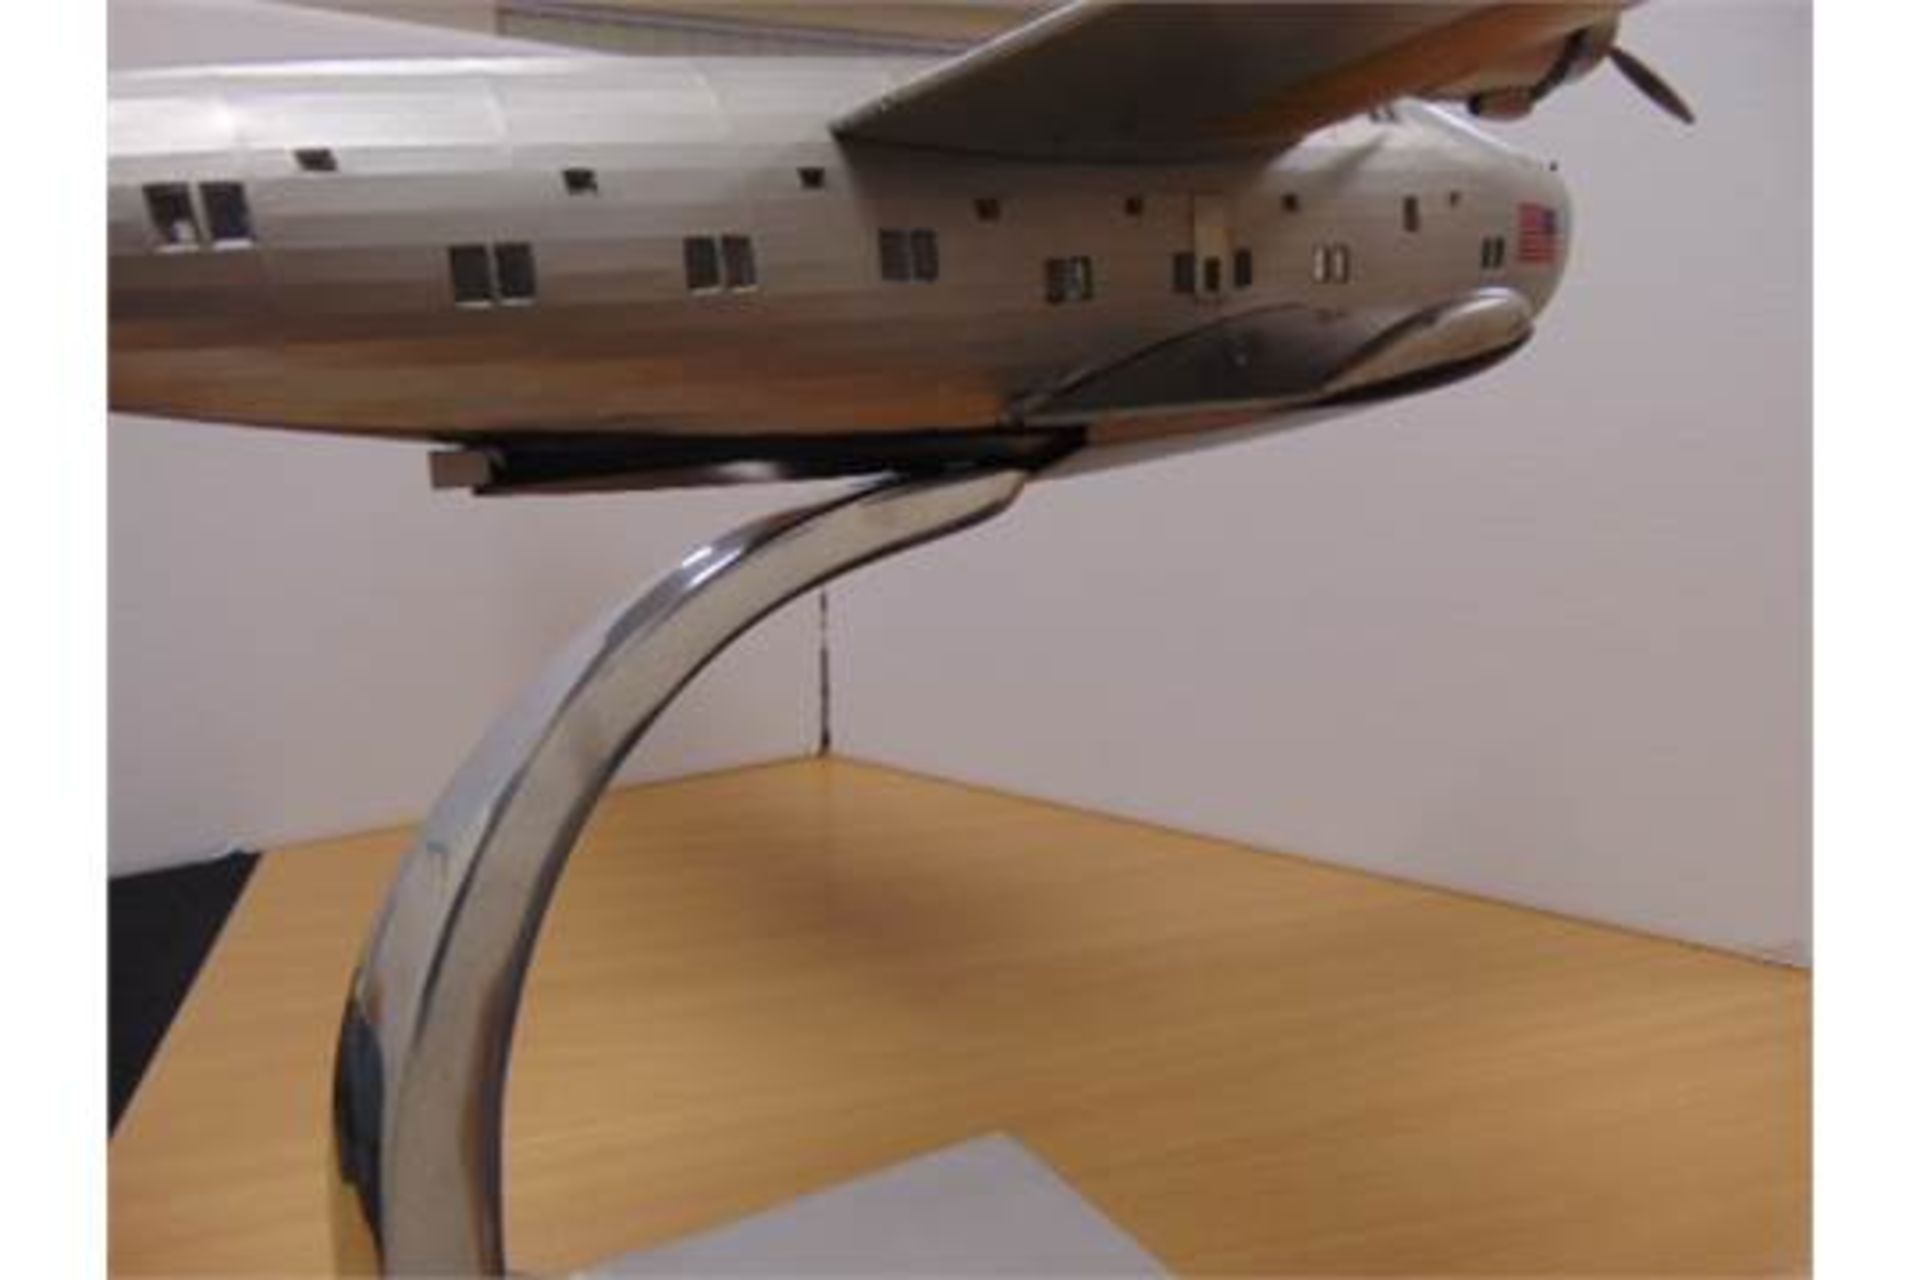 Pan Am Boeing 314 'Dixie Clipper' 23" Scale Model - Image 5 of 7